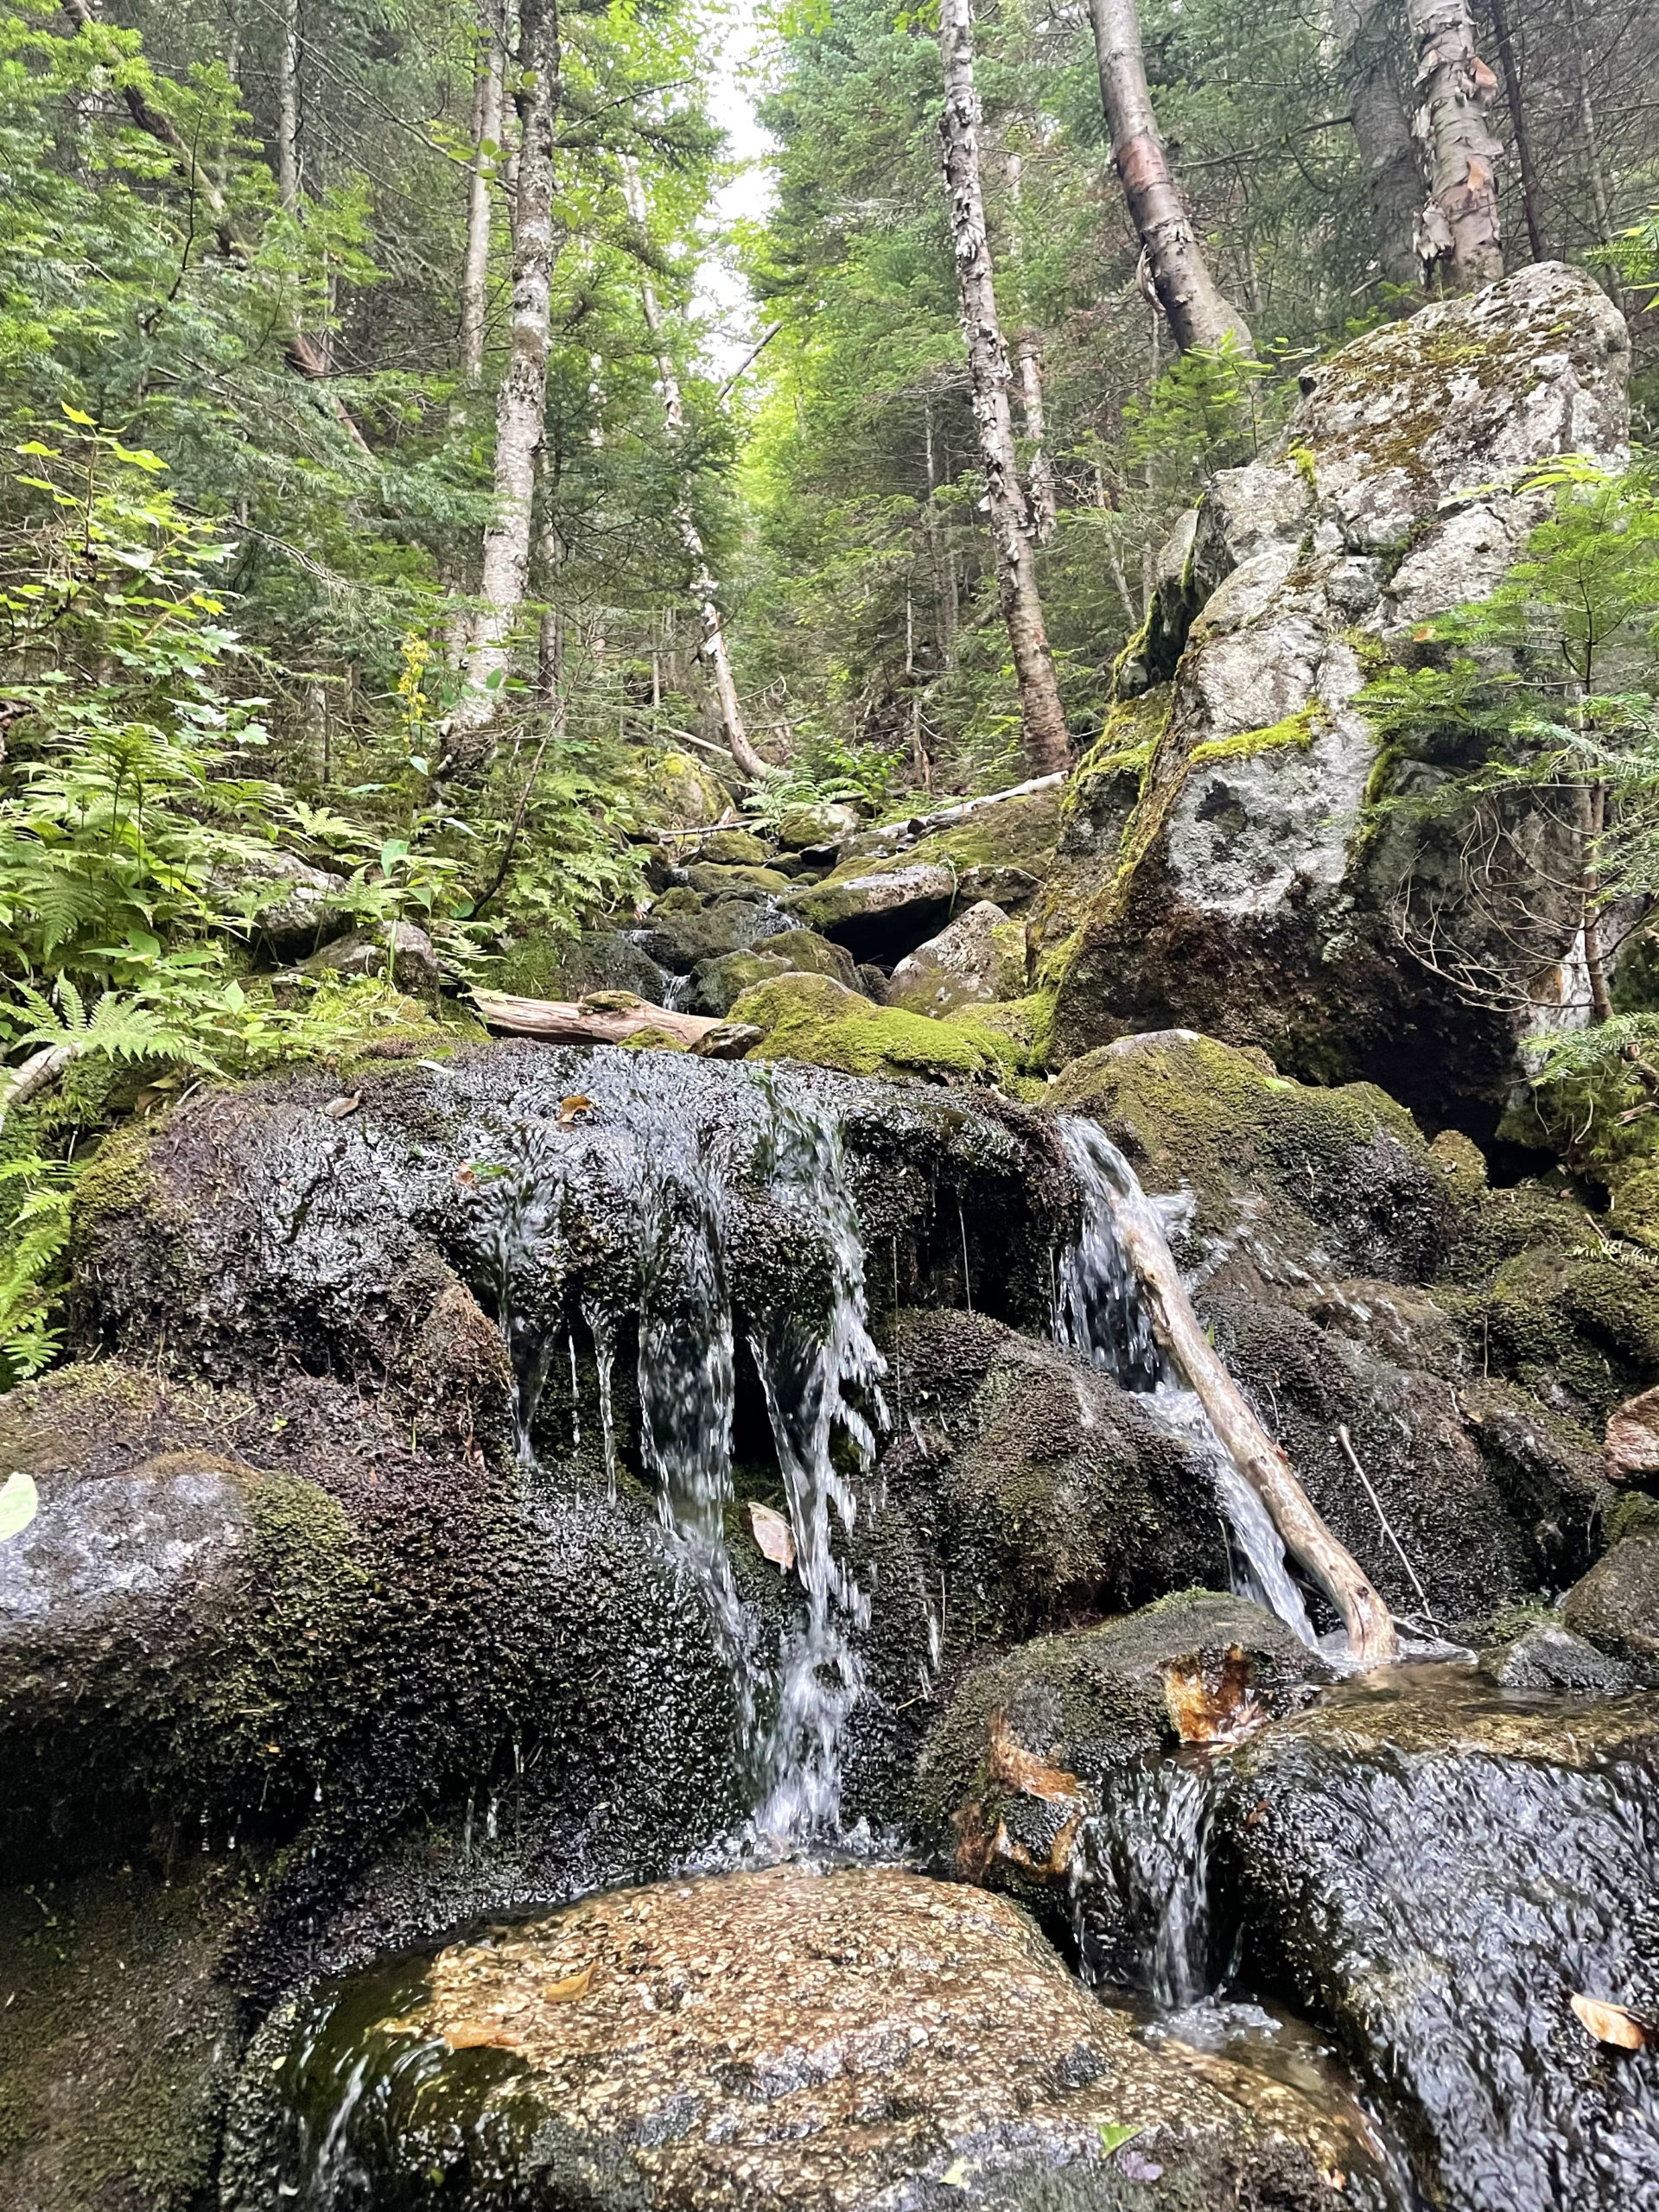 A small cascade, seen while hiking Mt. Hale and Mt. Zealand in the White Mountain National Forest, New Hampshire